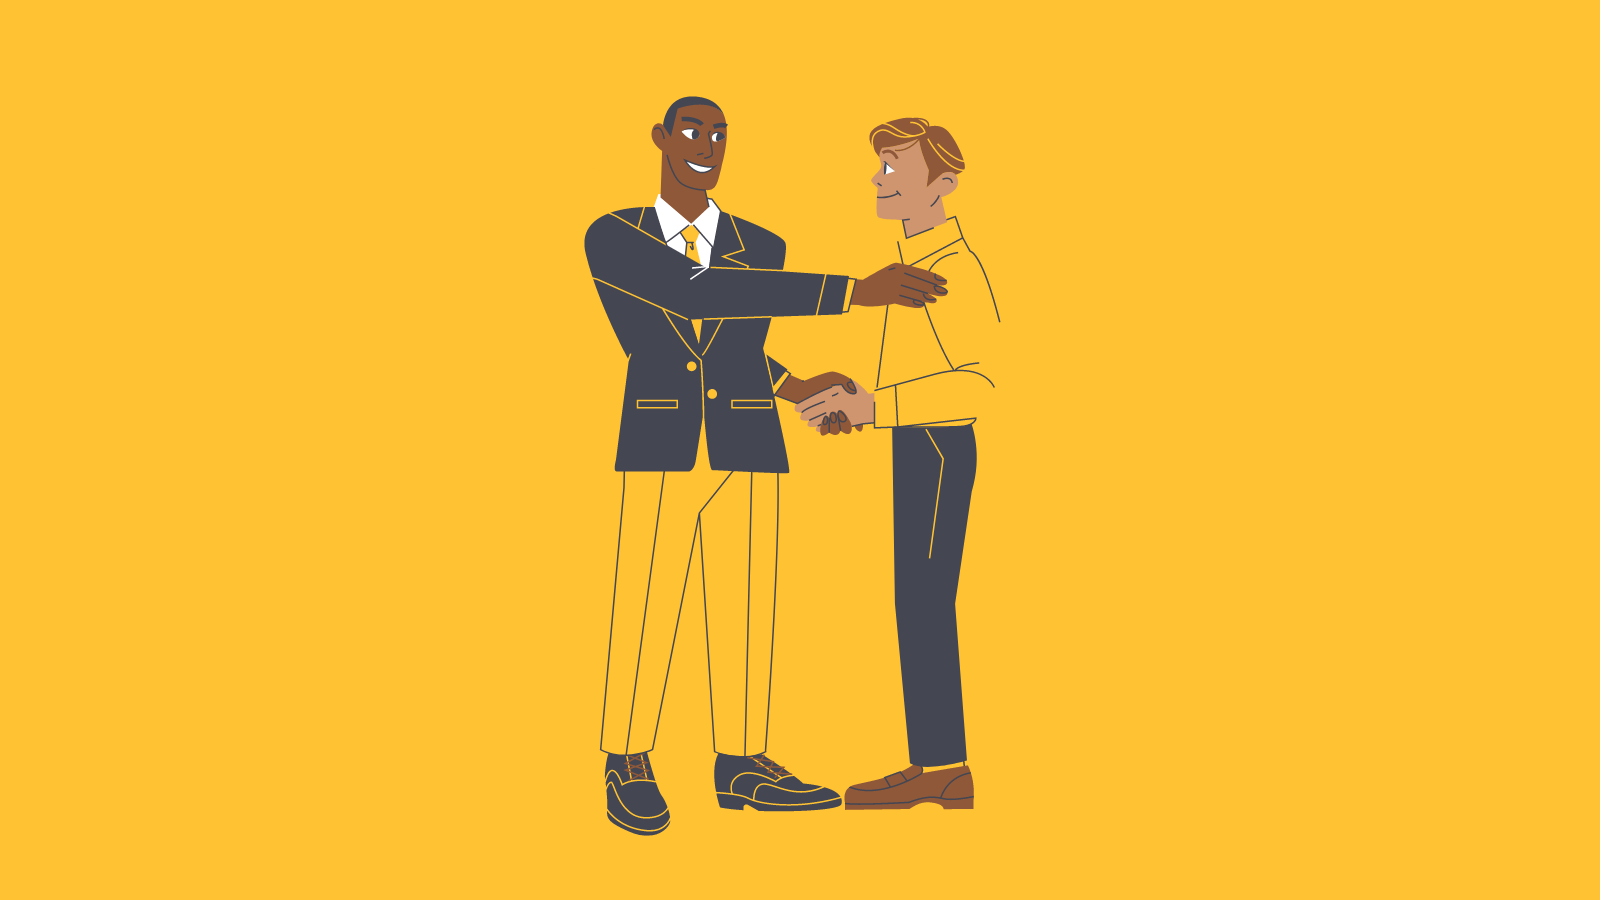 People in business attire shaking hands